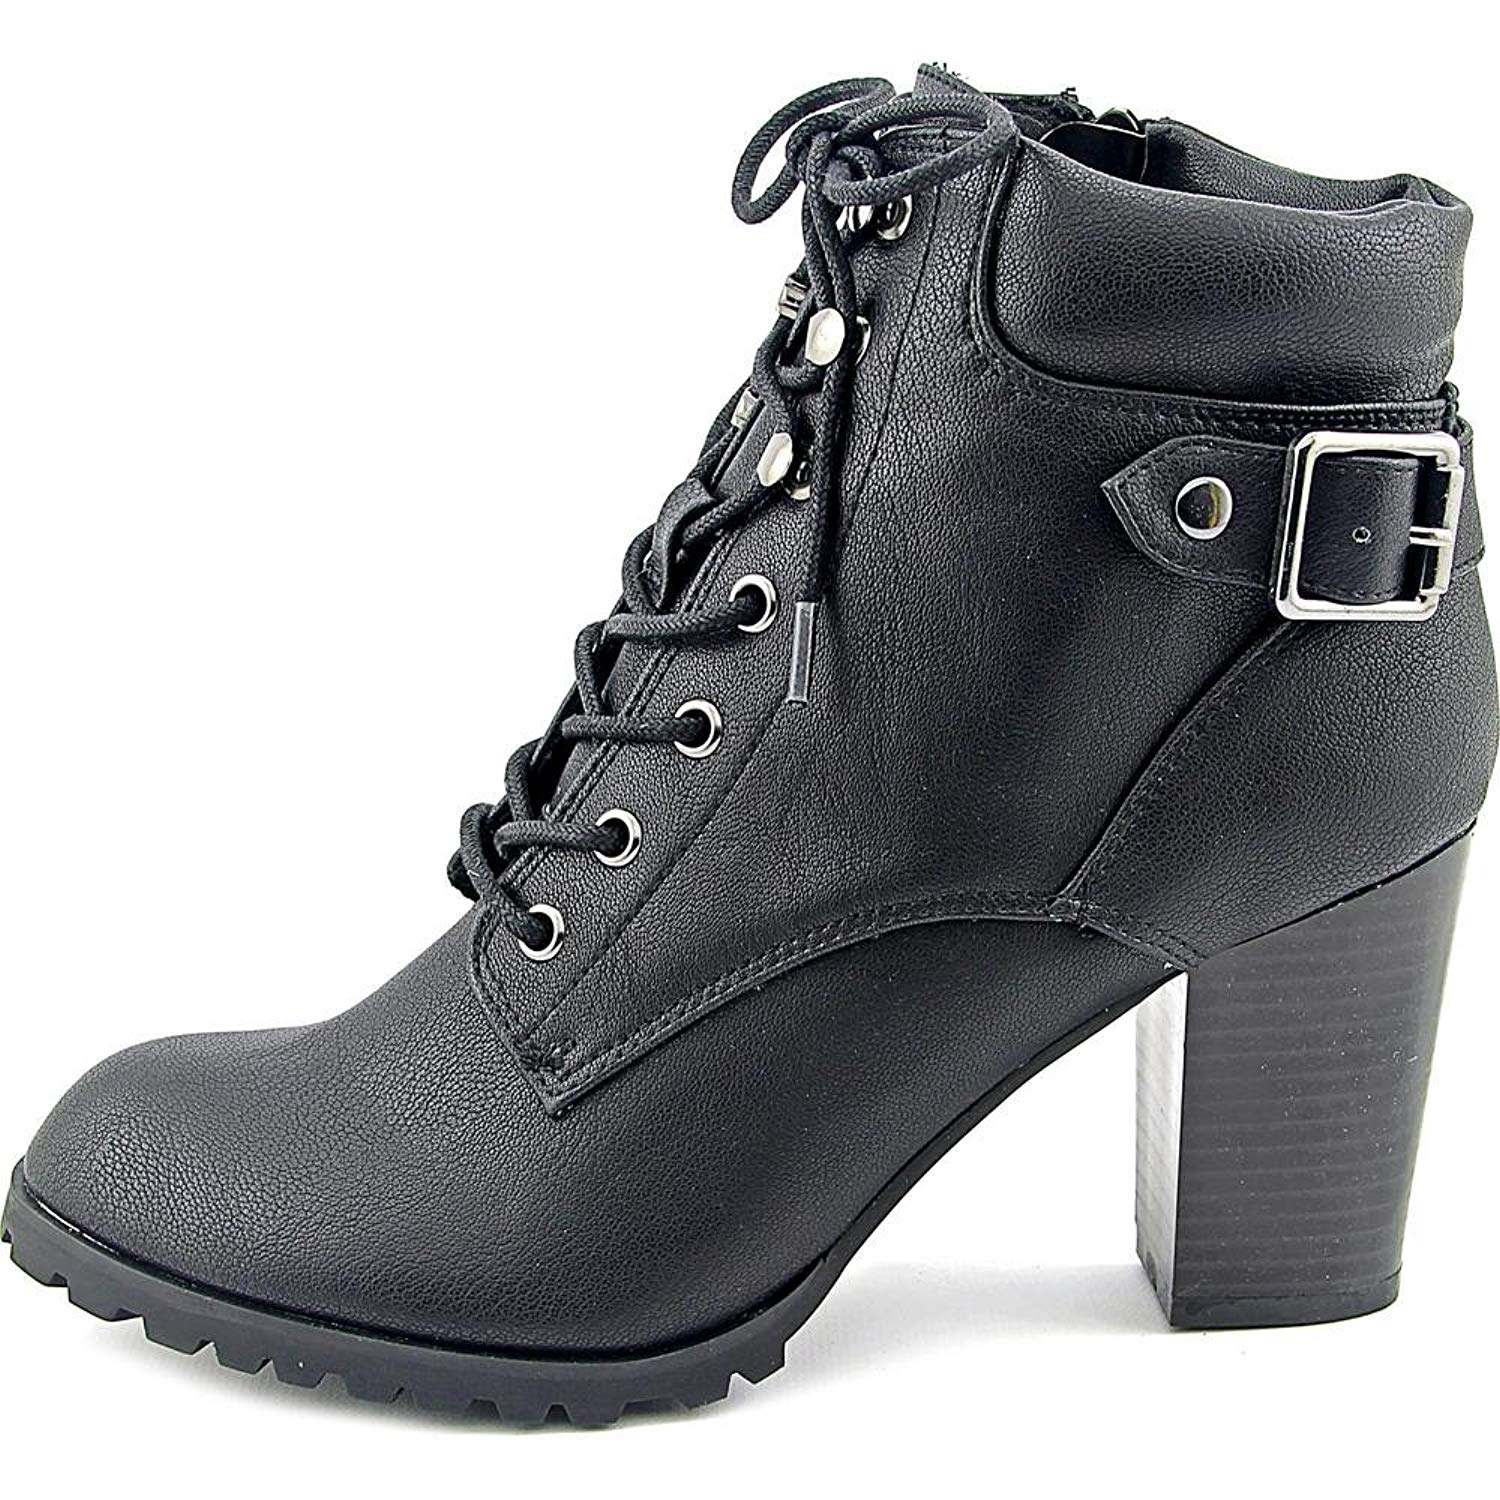 Style & Co. Womens Caitlin Leather Closed Toe Ankle Combat Boots | eBay